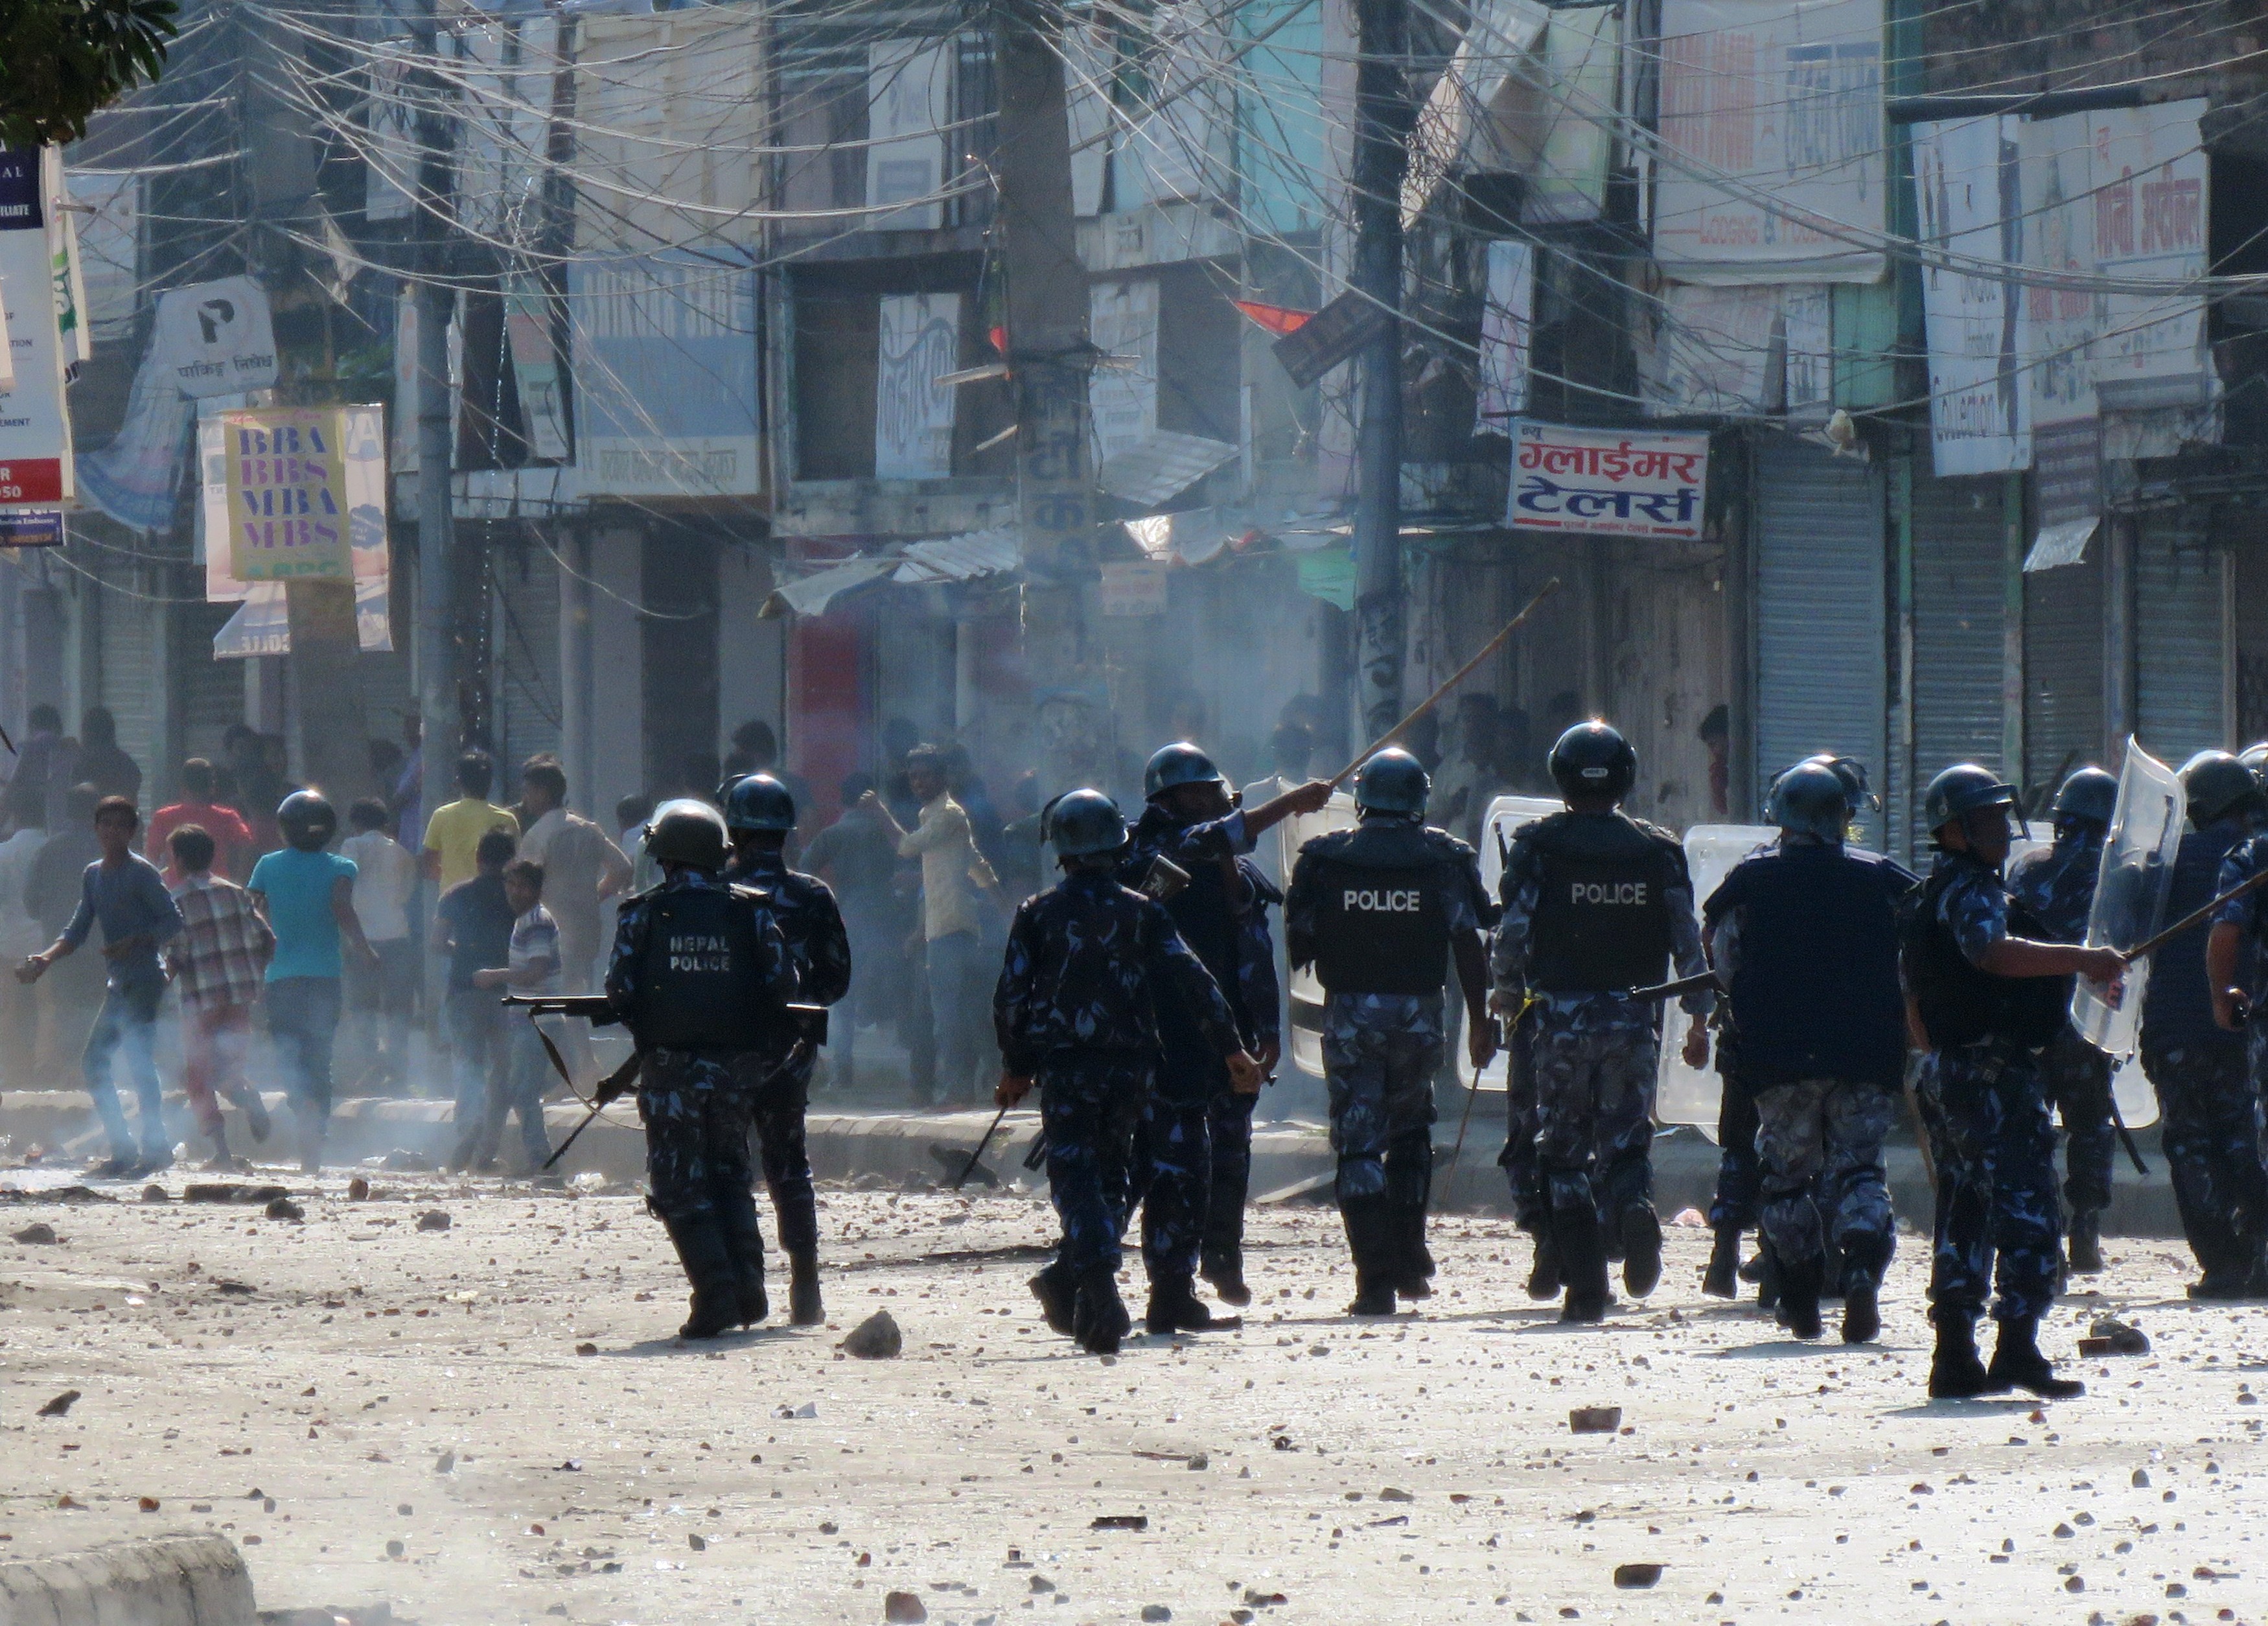 Nepalese police walk by protesters throwing rocks during clashes near the Nepal-India border at Birgunj, on Nov. 2, 2015. Police fired into a crowd of protesters trying to block a key border checkpoint and killed an Indian civilian as anger over a new constitution boiled over. (STR—AFP/Getty Images)